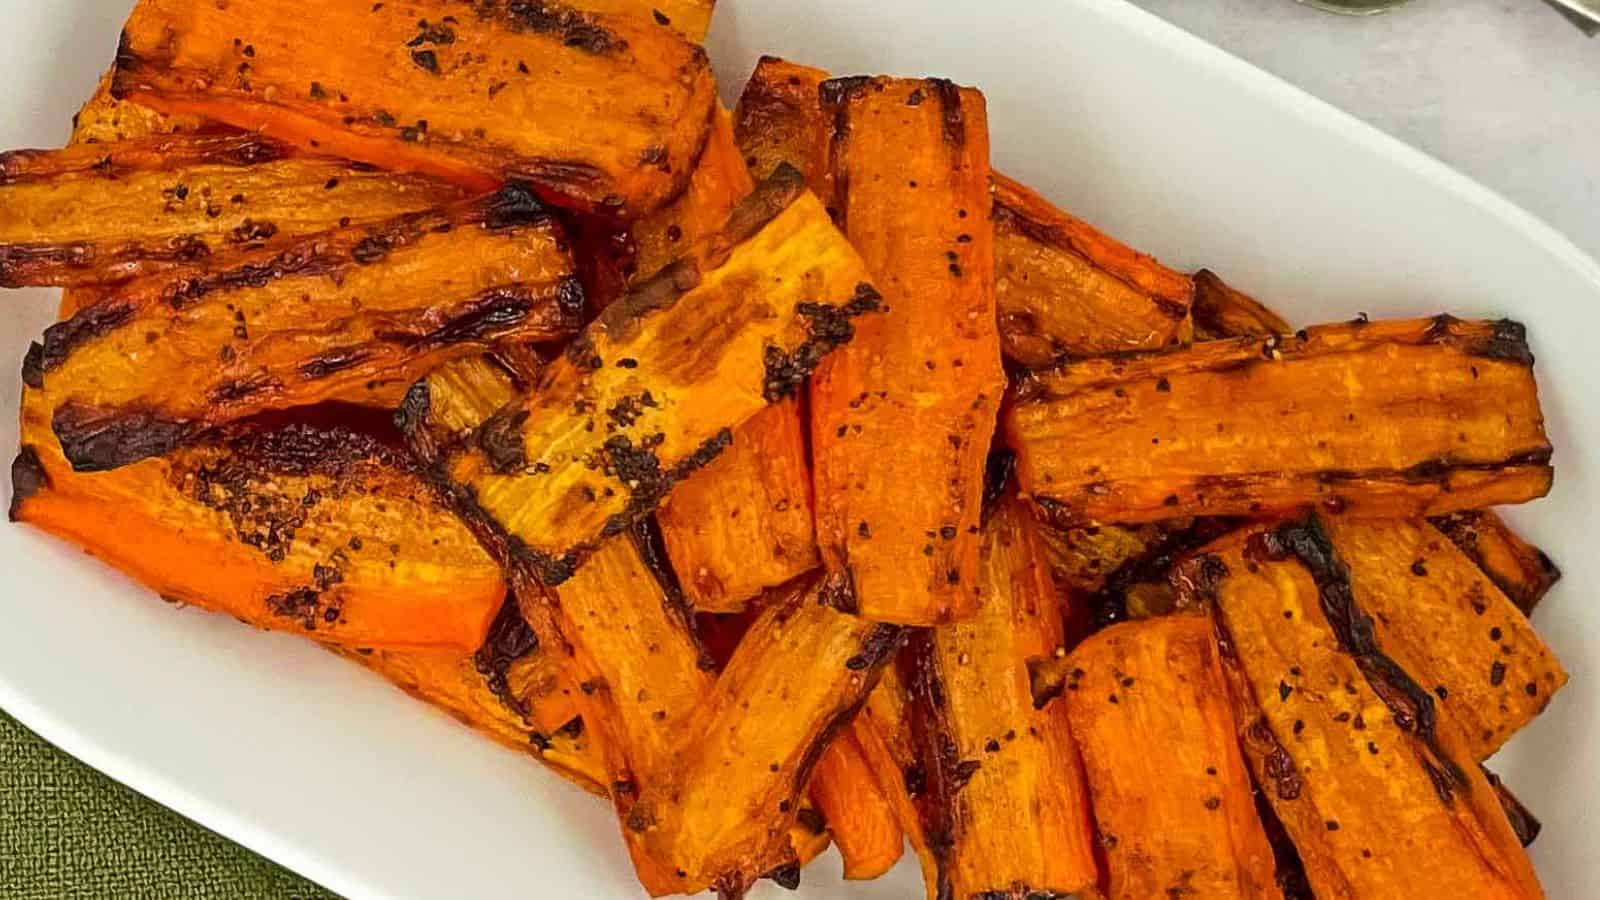 Roasted carrots on a white plate with a fork.